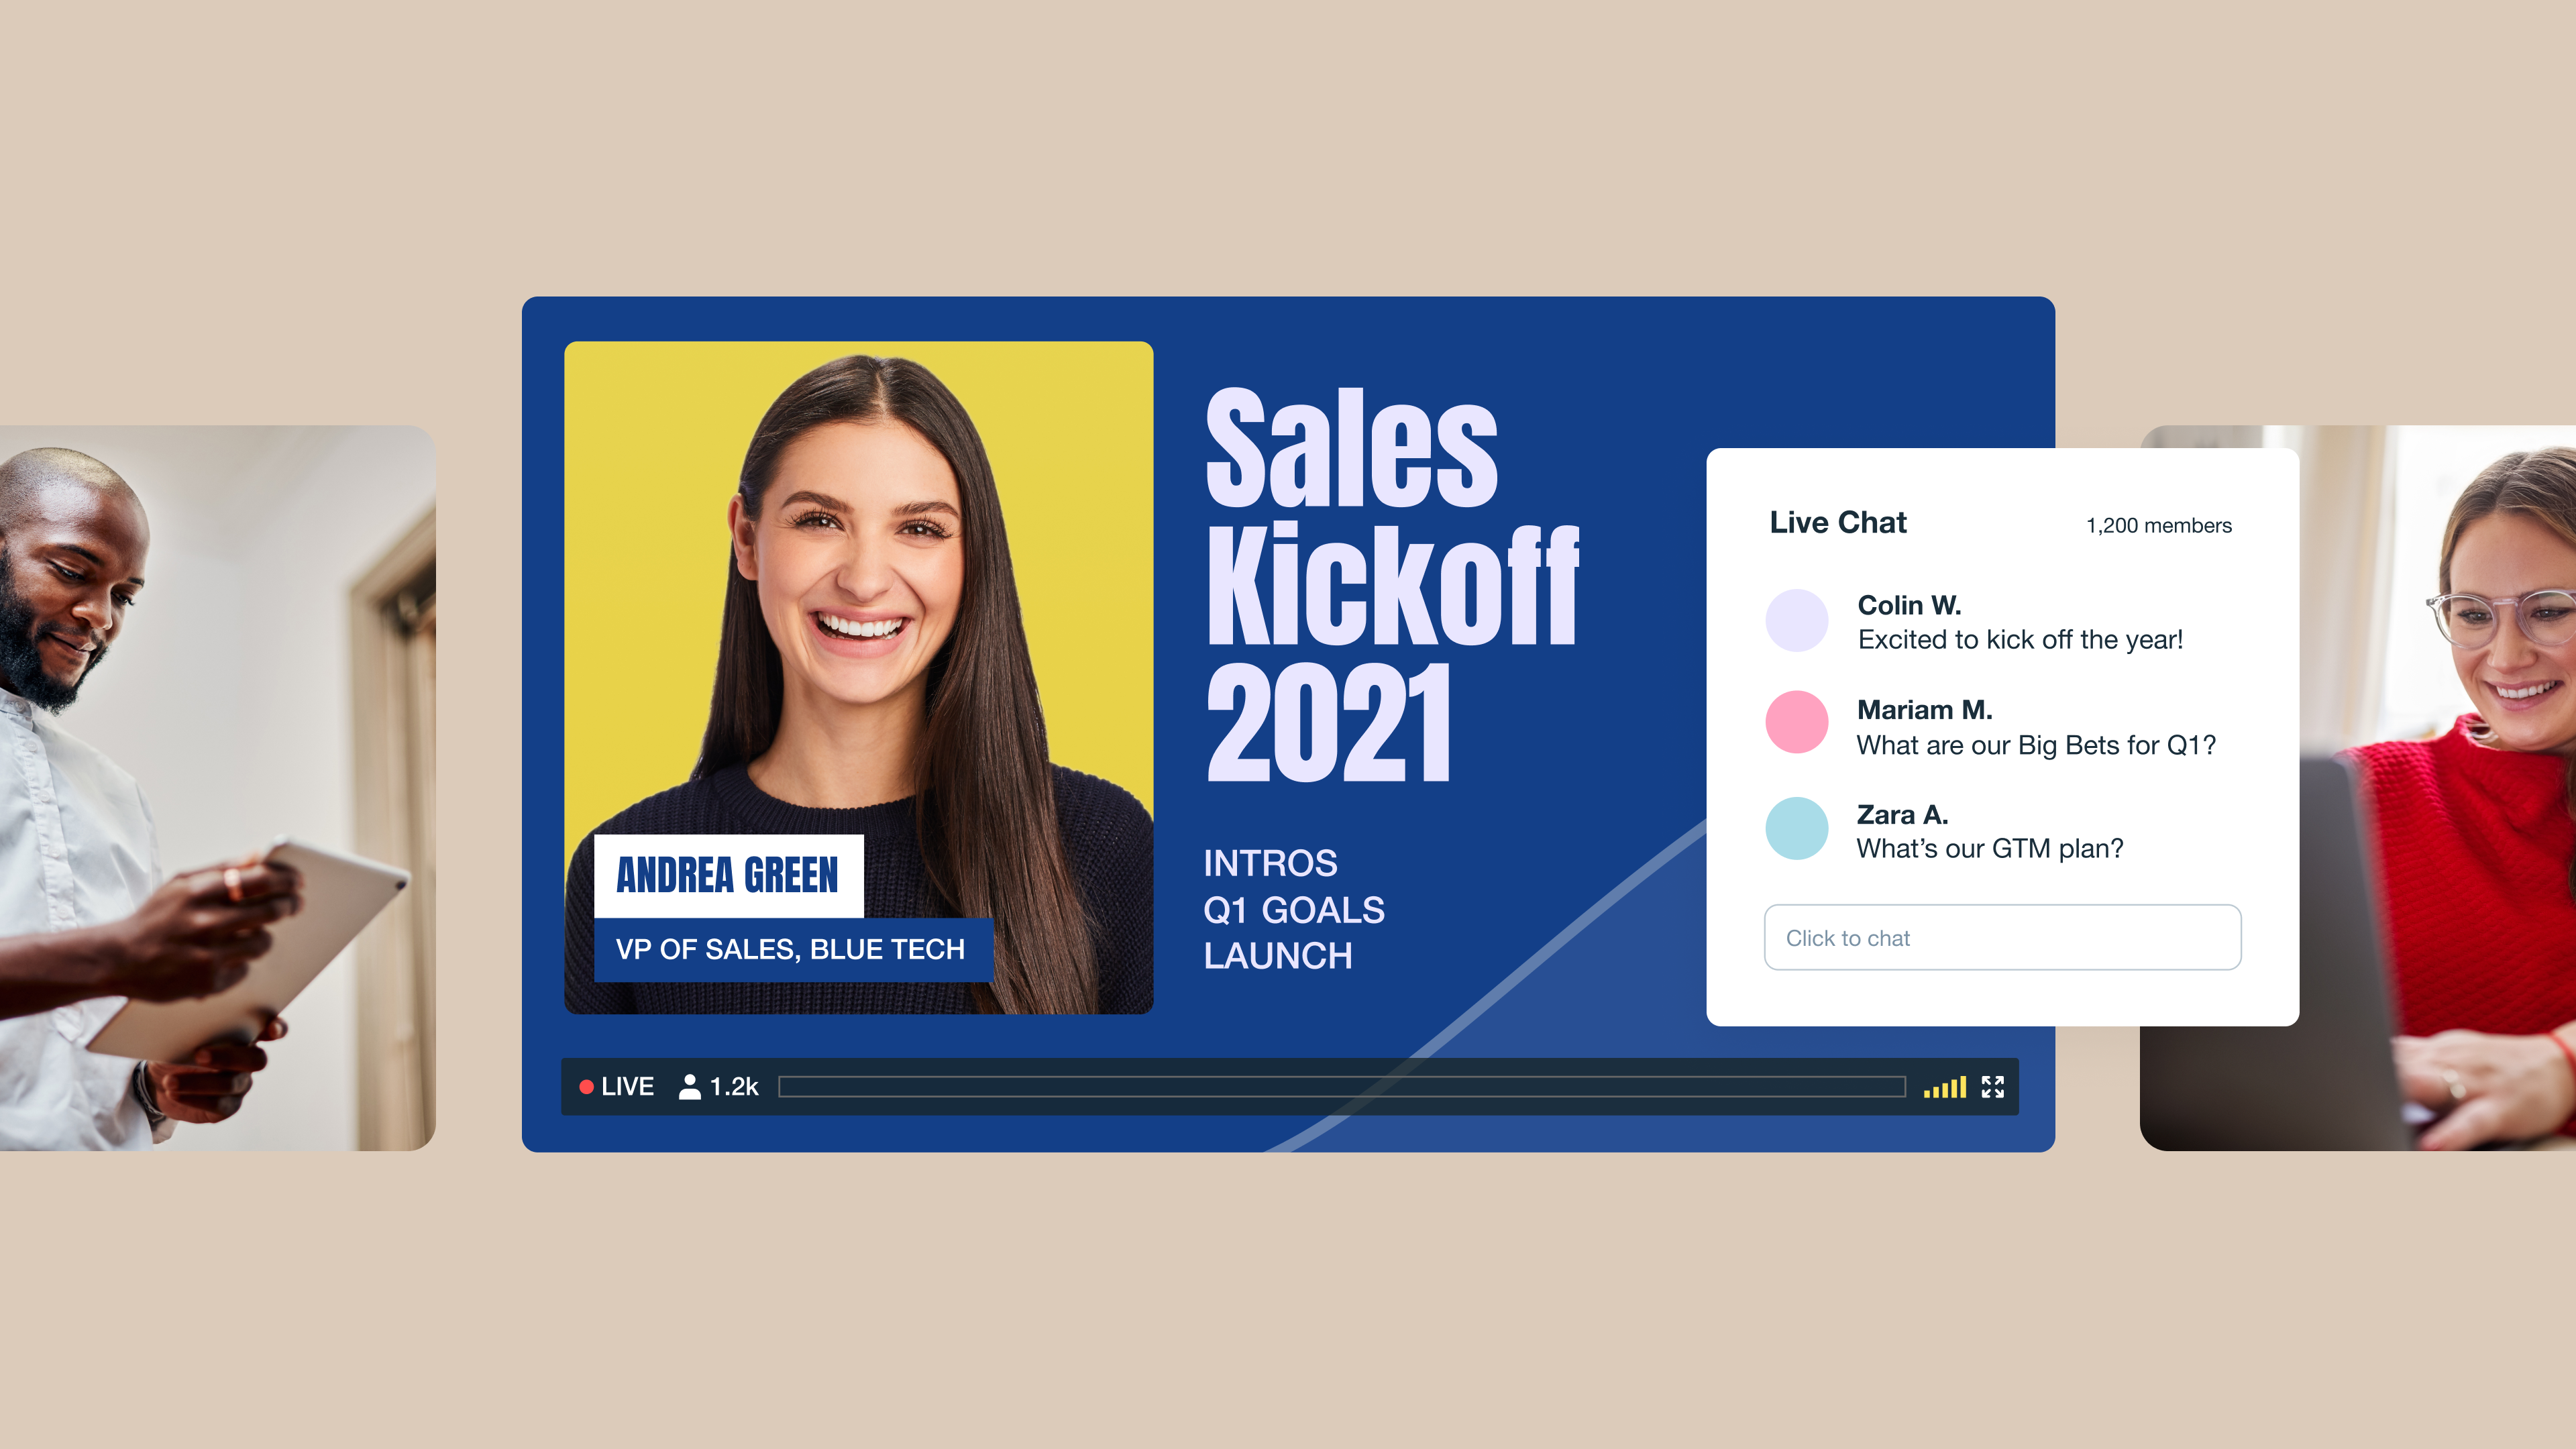 A virtual sales kickoff event broadcast with live streaming